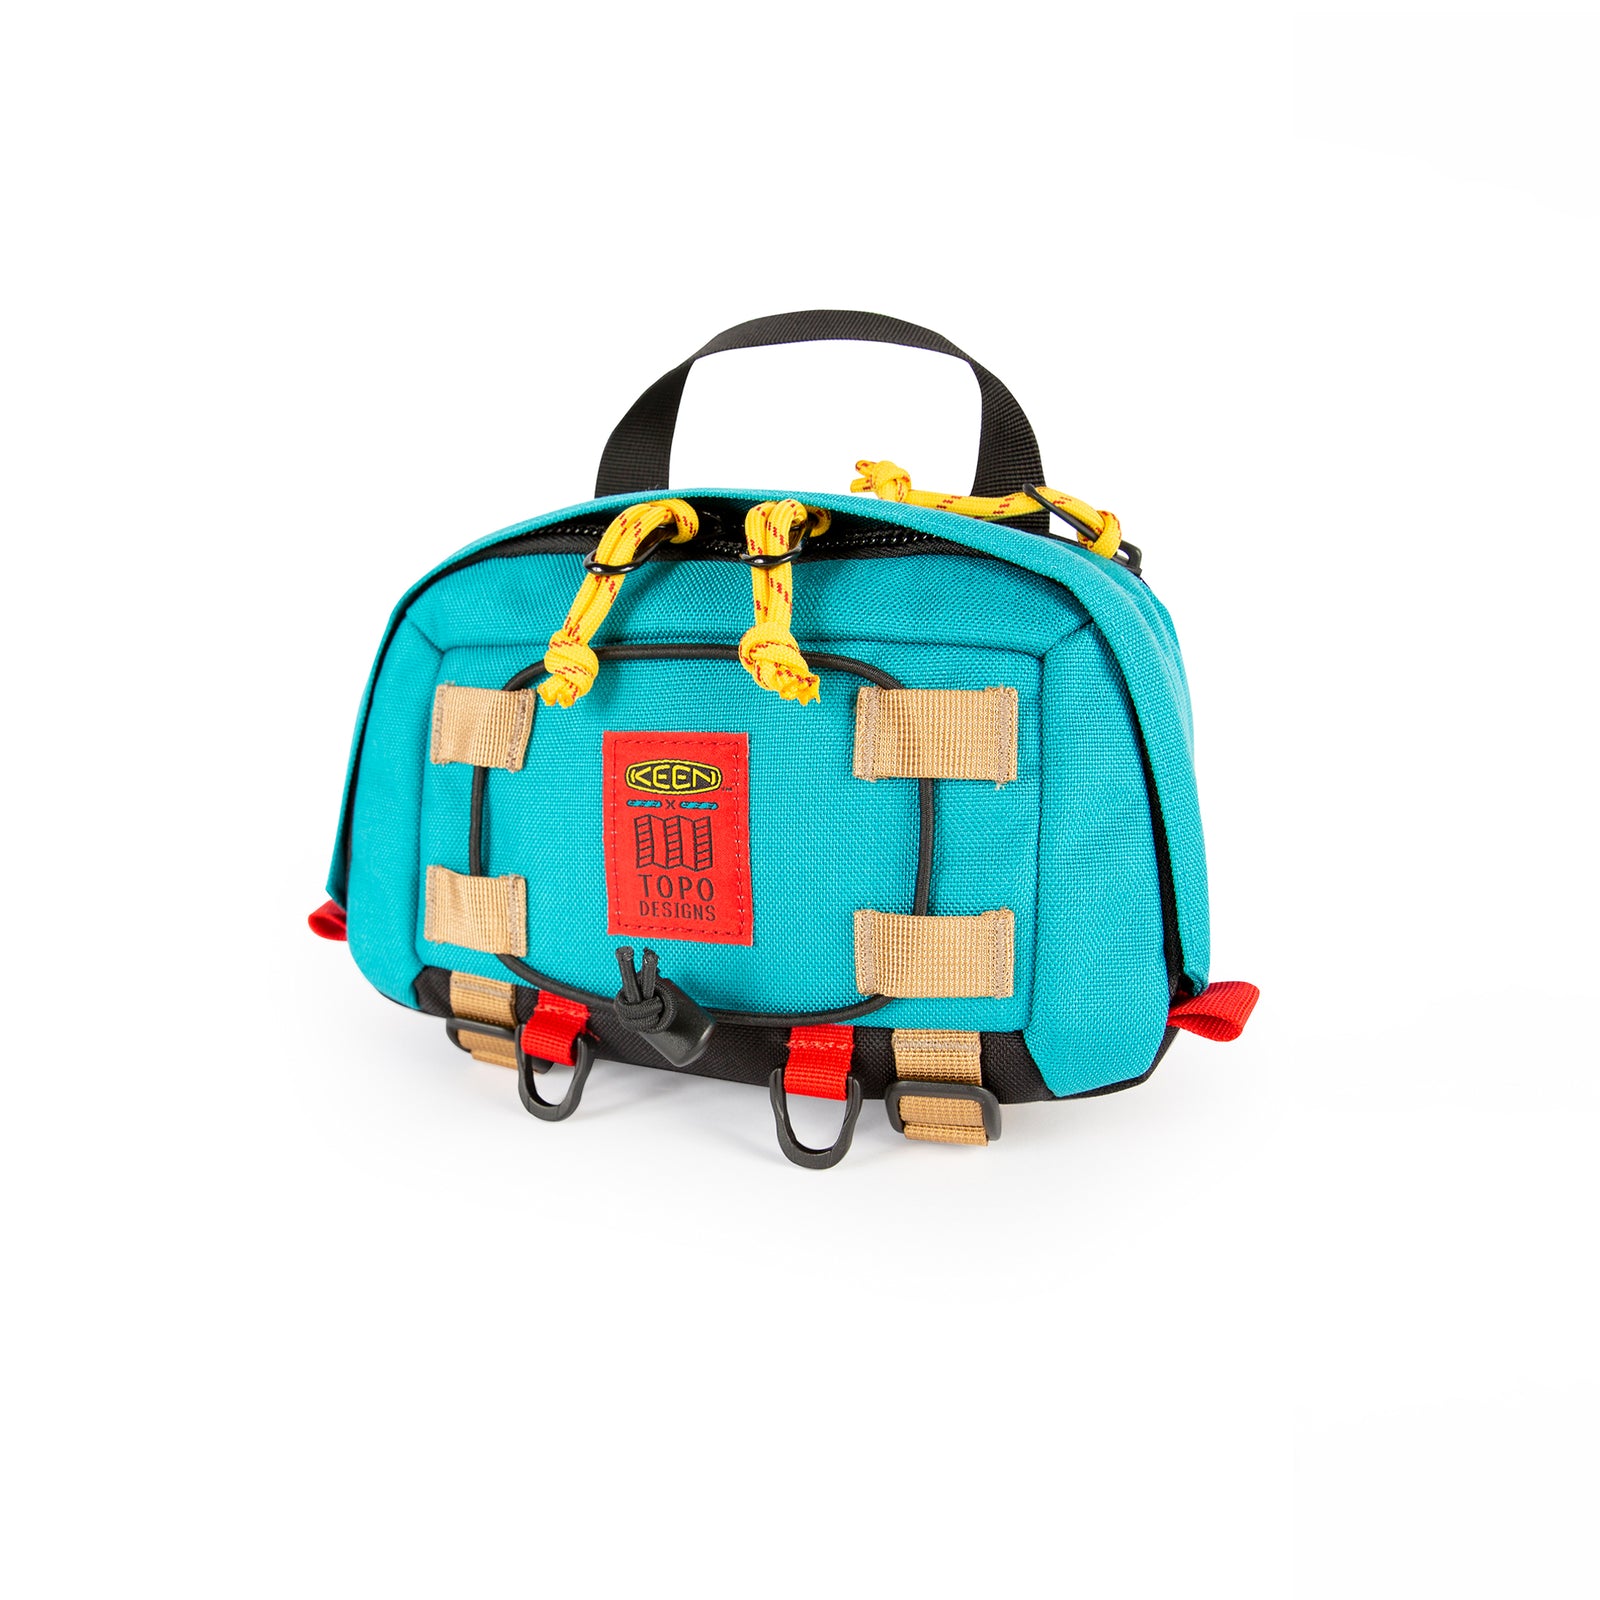 Topo Designs x Keen River Subalpine Hip Pack fanny bum bag in Turquoise blue.